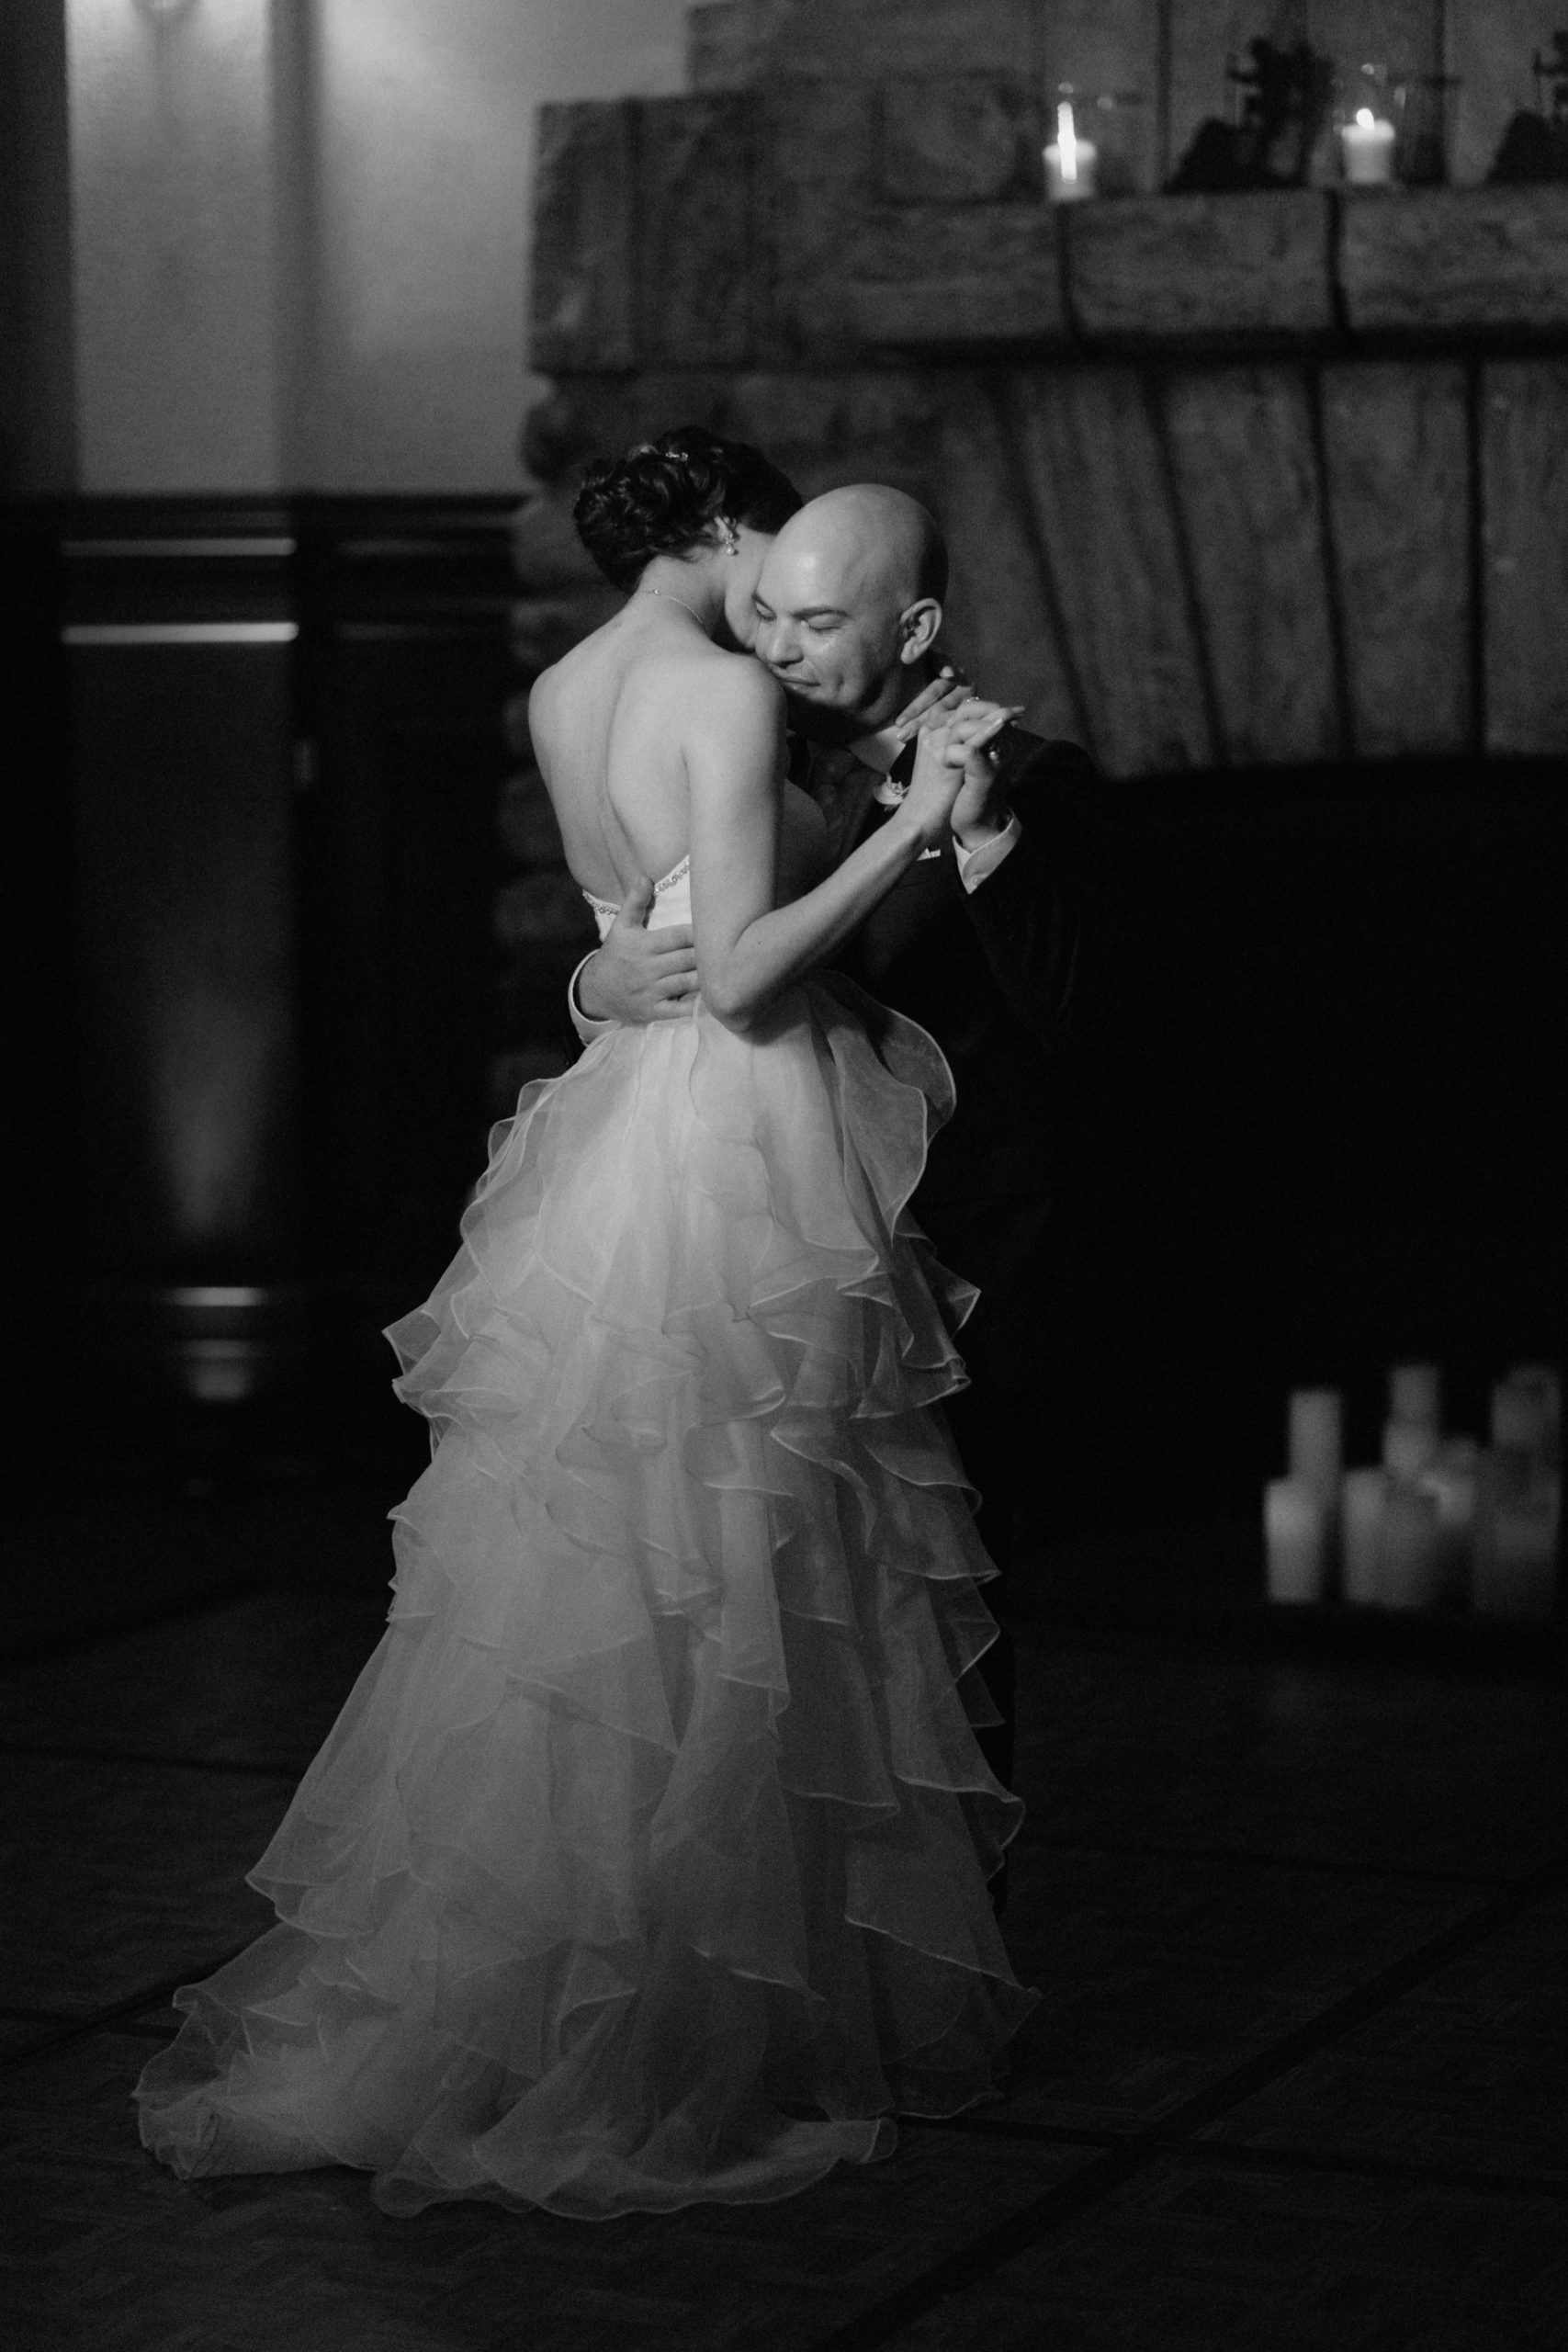 First dance at a wedding reception in the Sun Room at Chateau Lake Louise